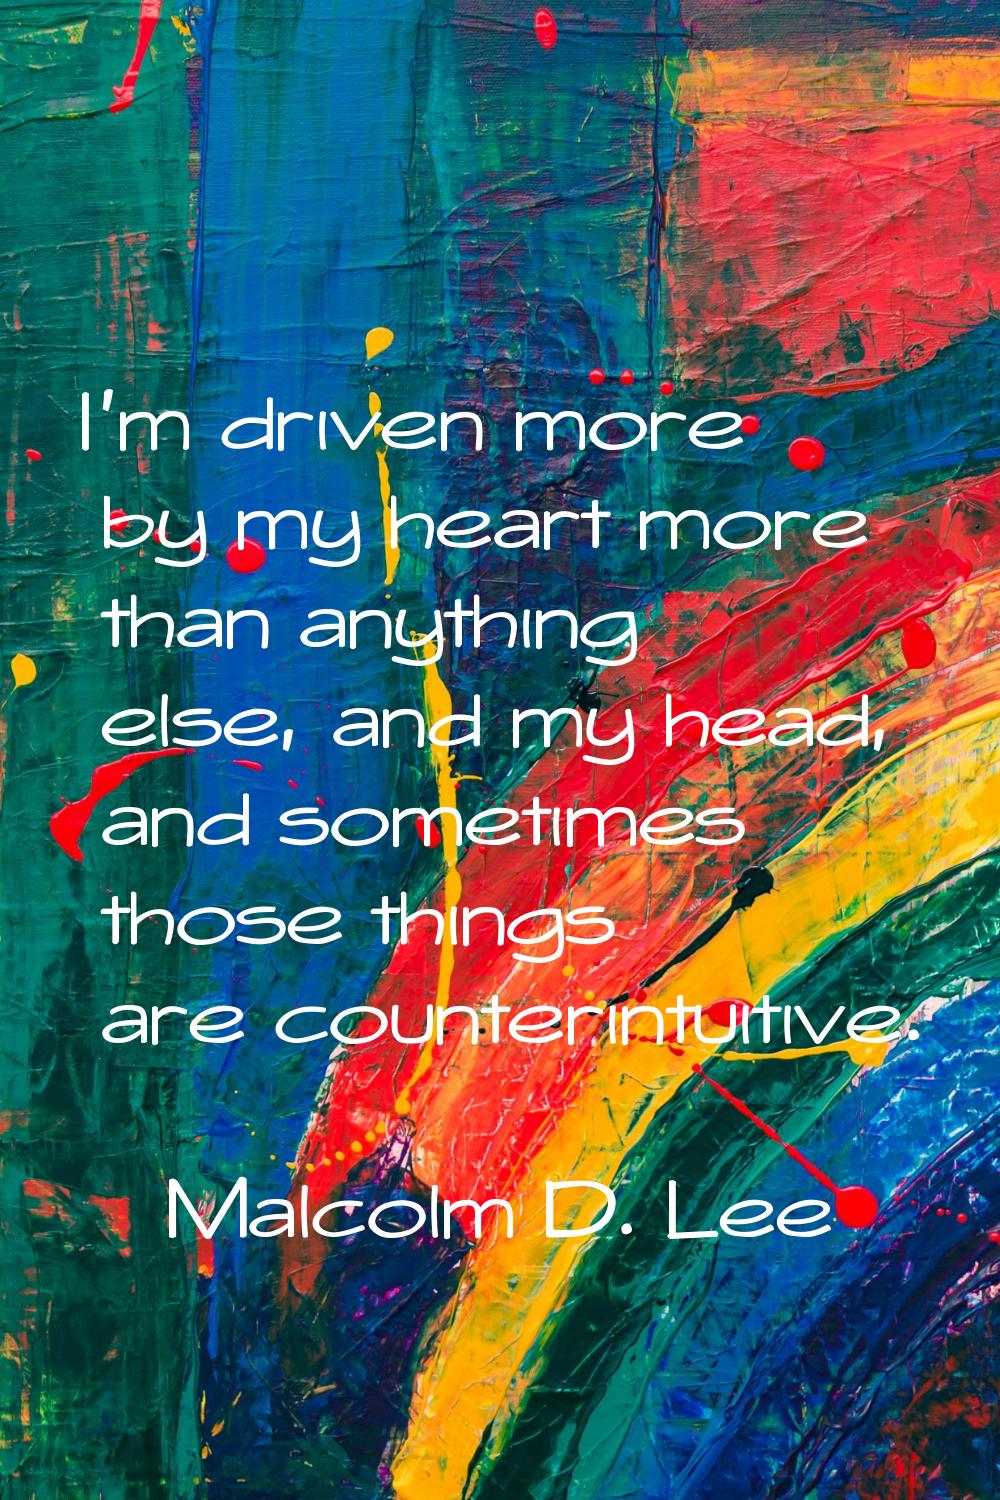 I'm driven more by my heart more than anything else, and my head, and sometimes those things are co